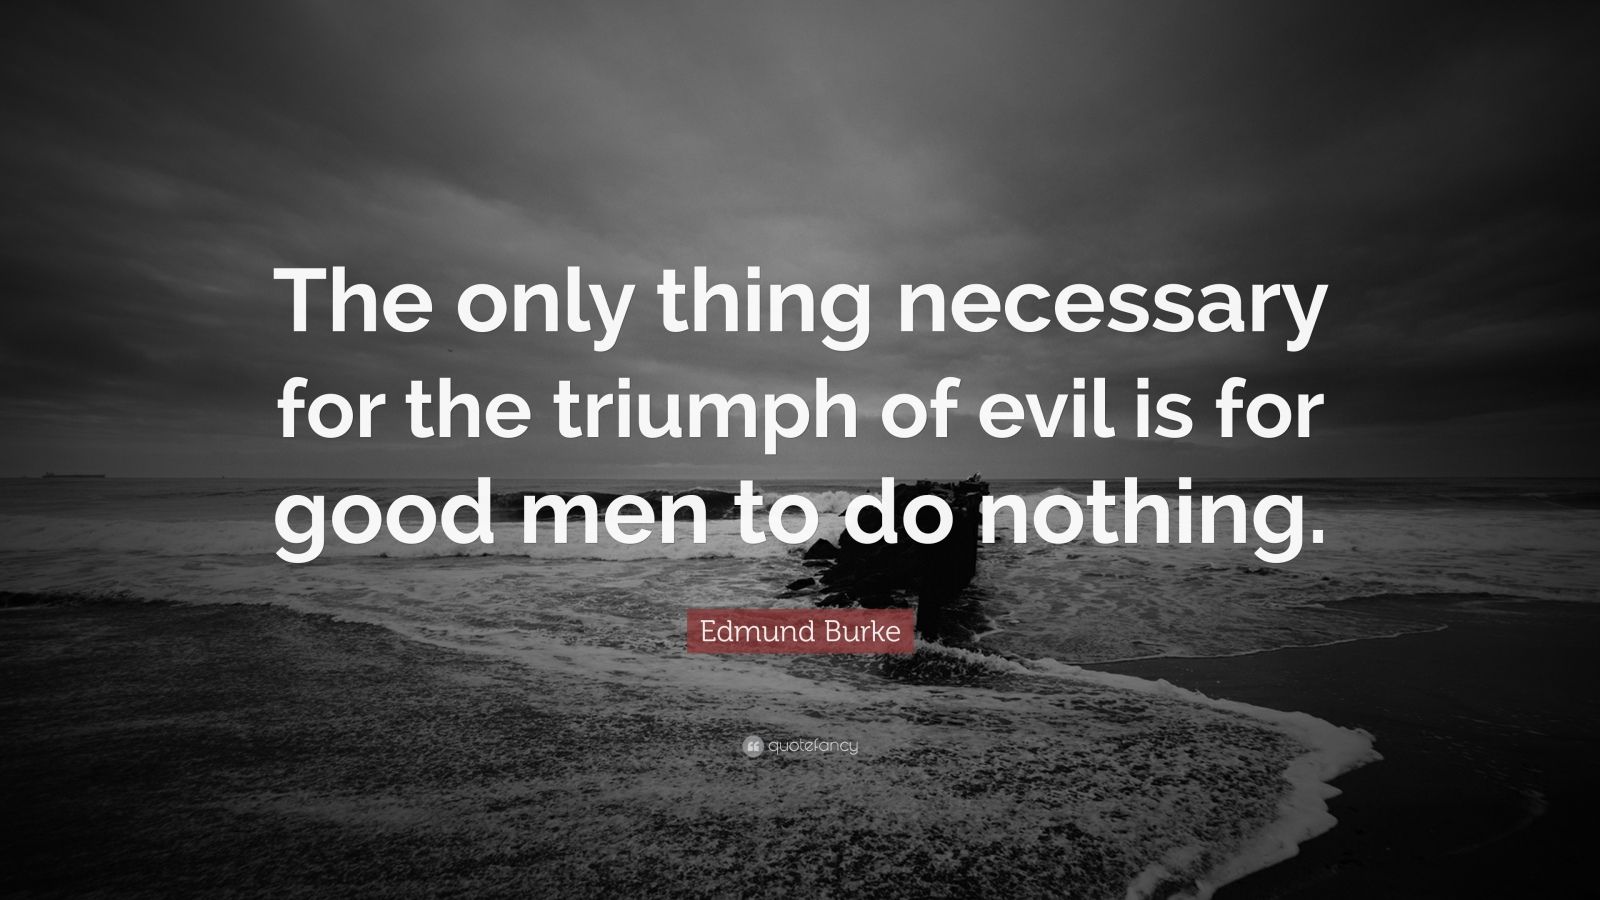 The Only Thing Necessary For The Triumph Of Evil Is For Good Men To Do Nothing 46